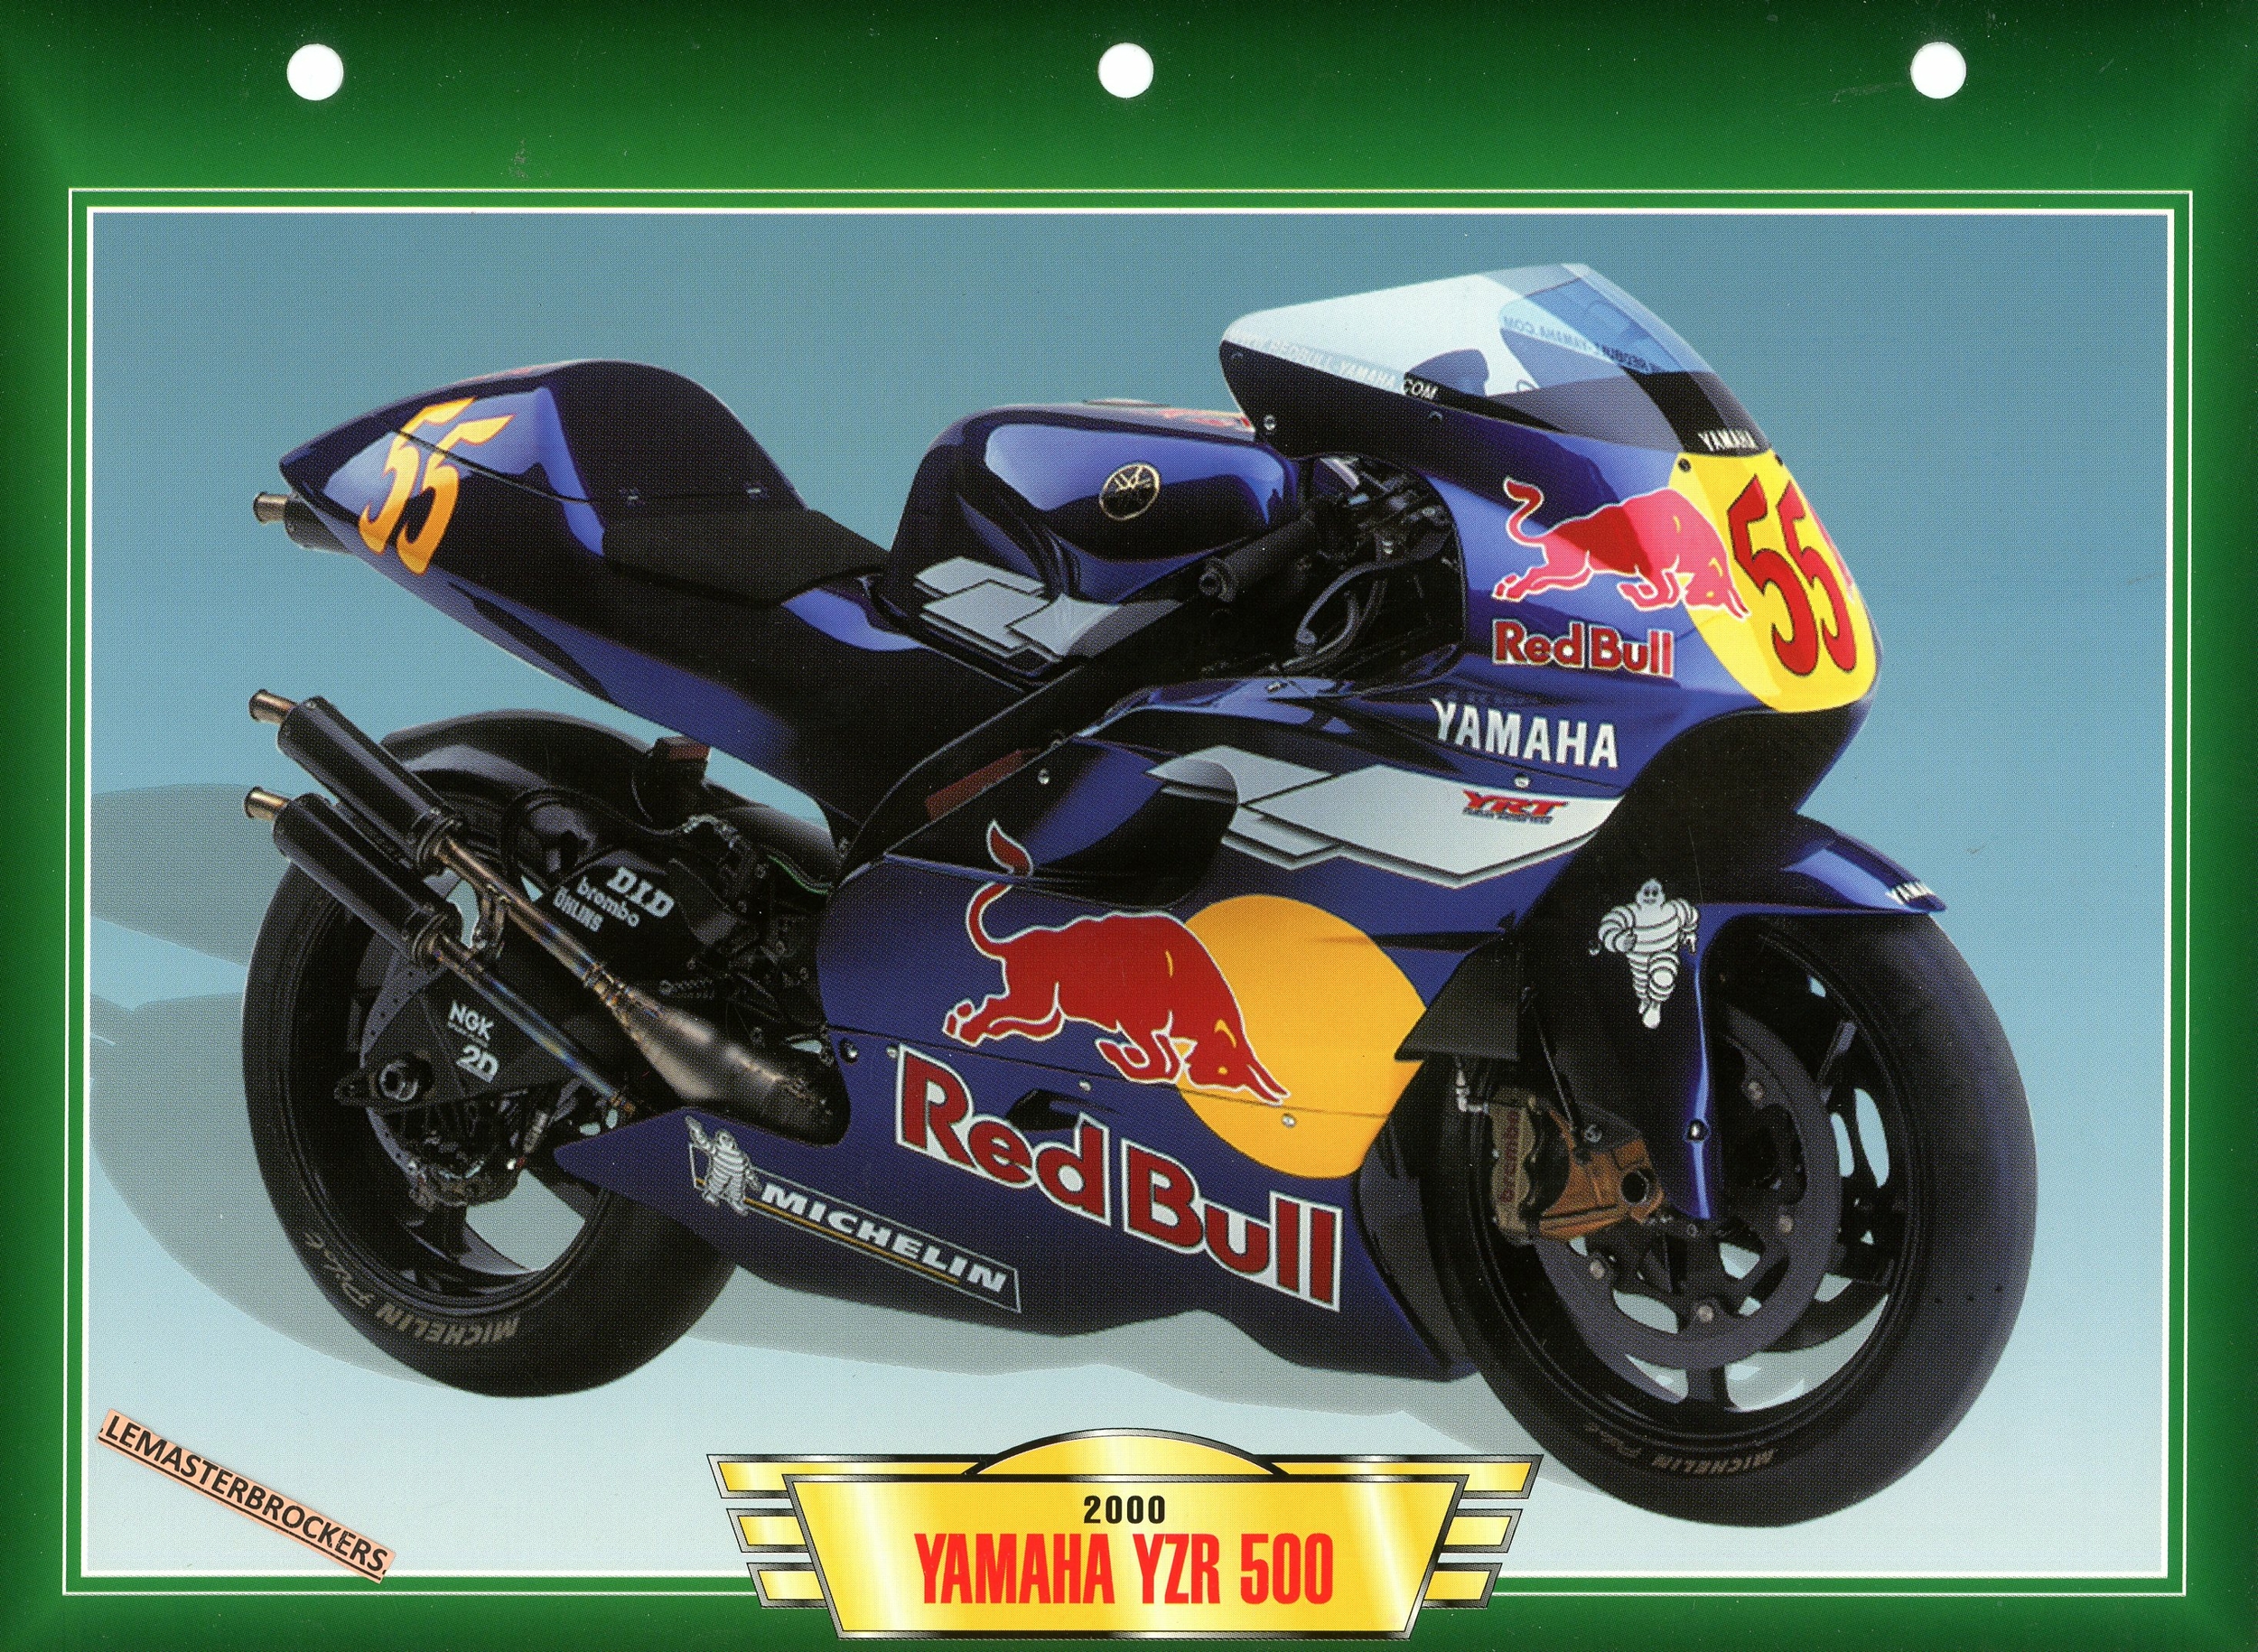 FICHE-MOTO-YAMAHA-YZR500-RED-BULL-lemasterbrockers-card-motorcycles-YZR